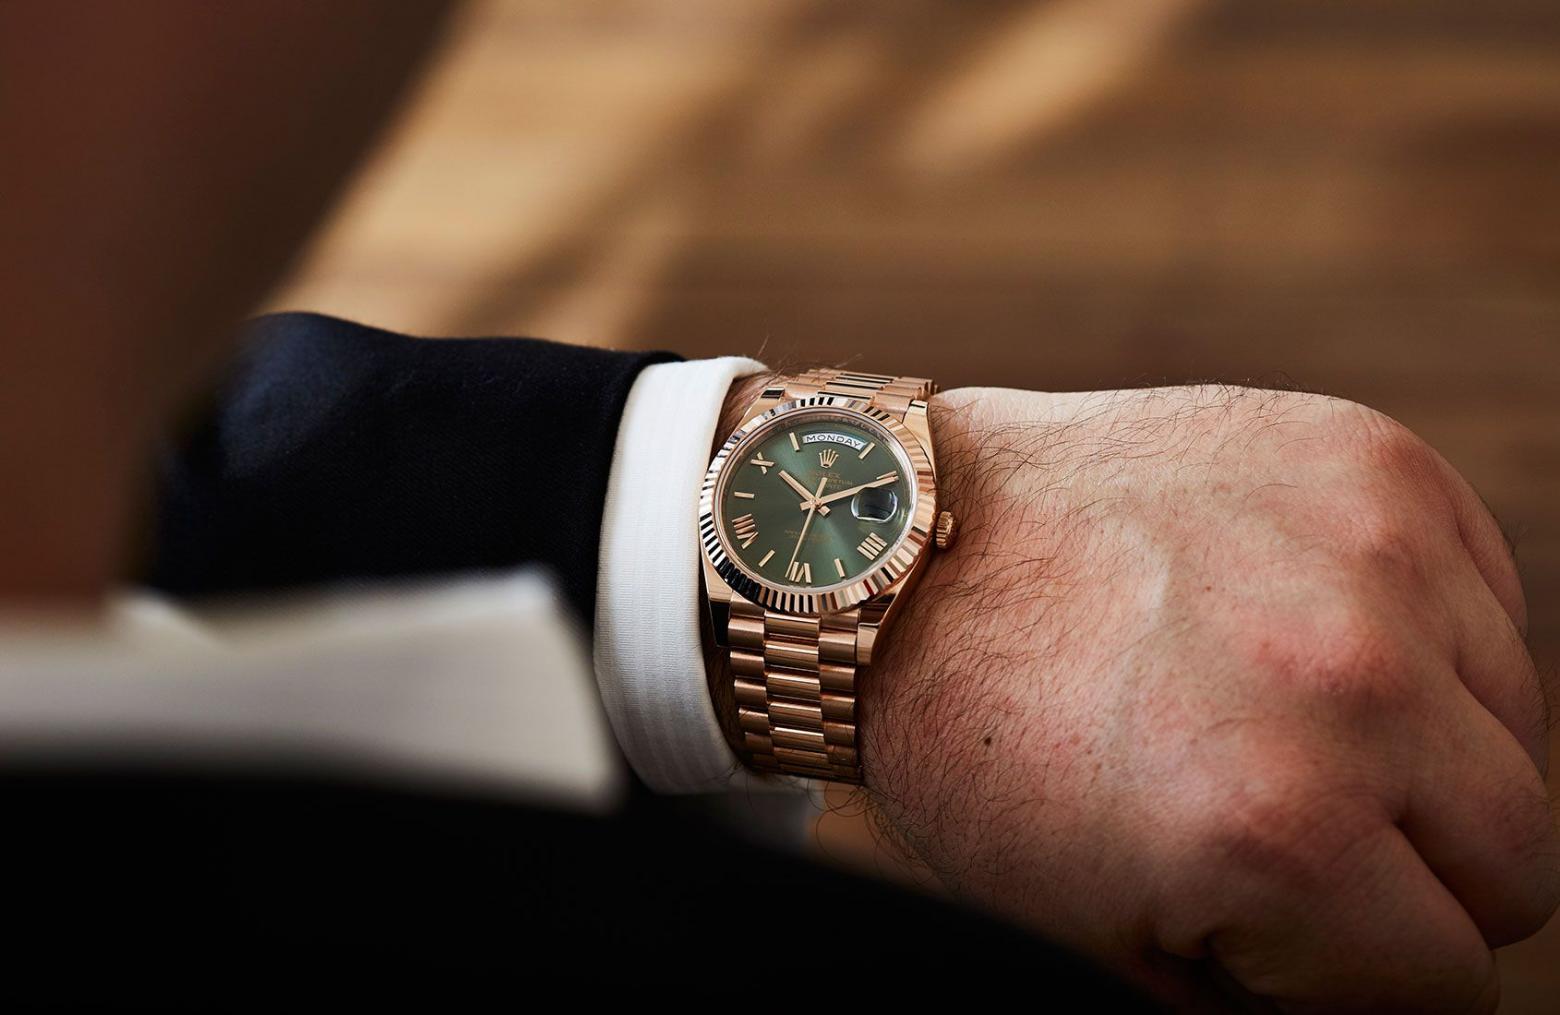 The Rolex Presidential: What Makes This Watch So Prestigious